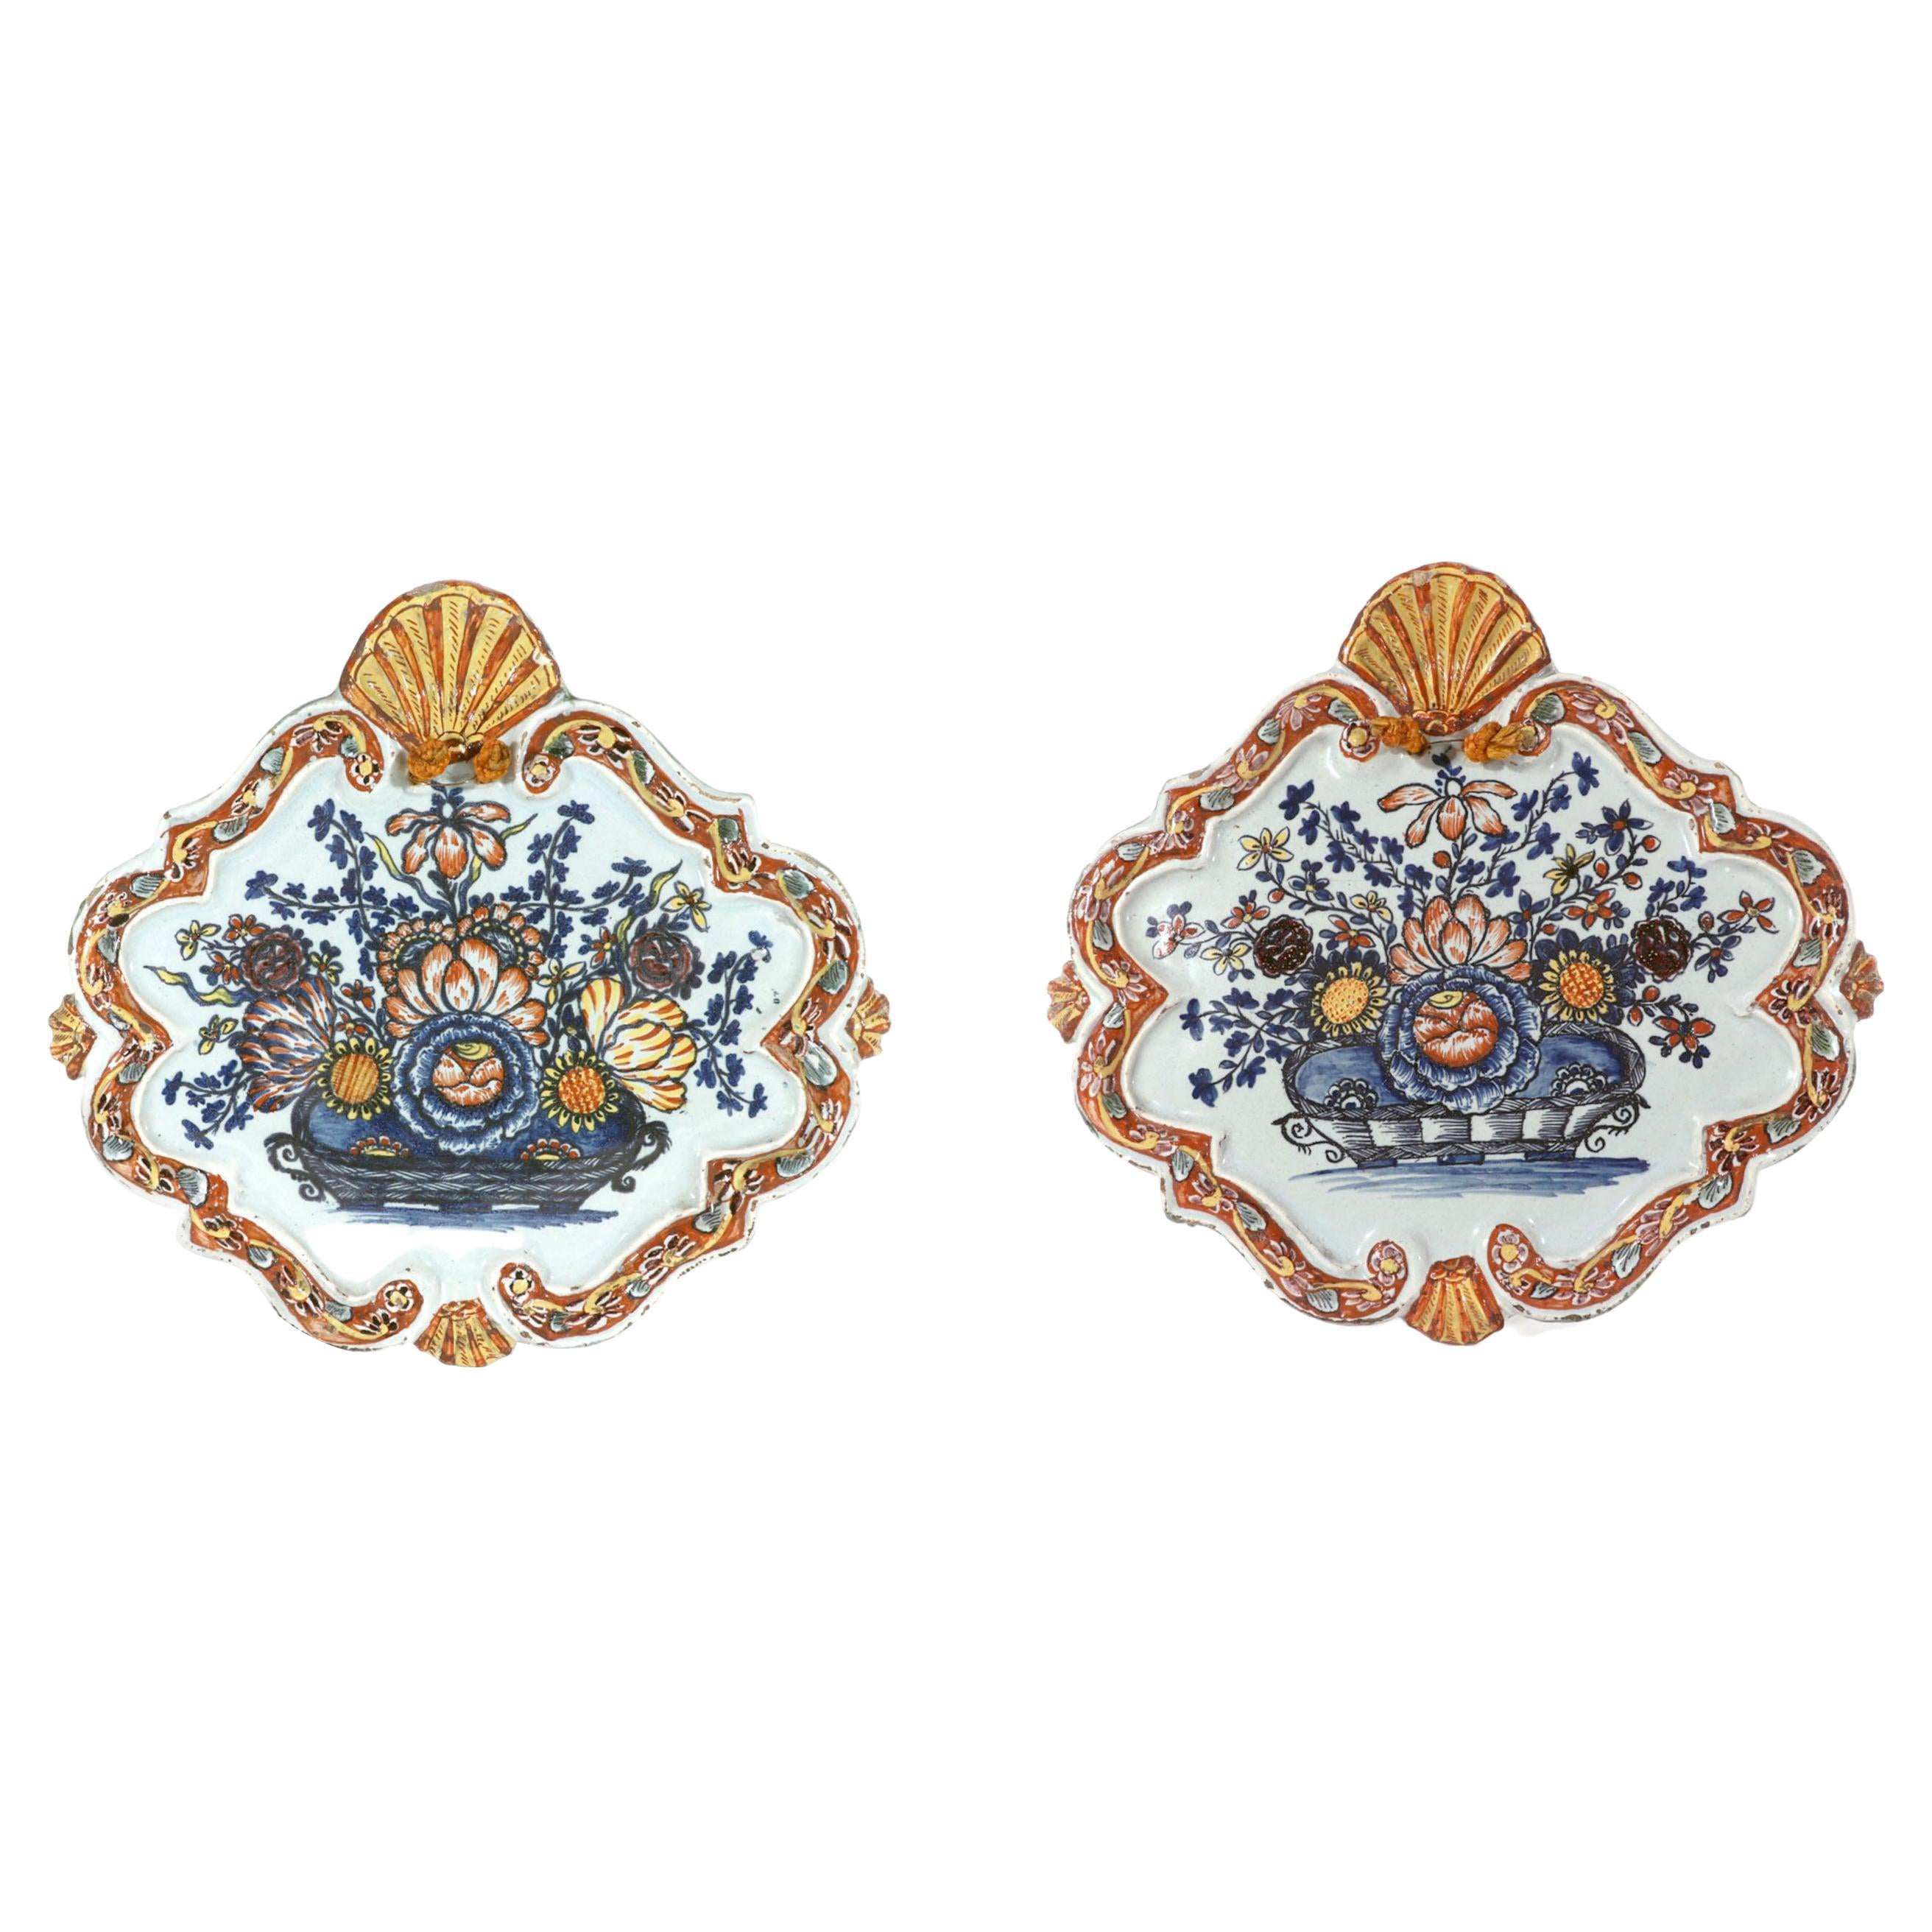 Dutch Delft Polychrome Shaped Plaques with Flower Baskets